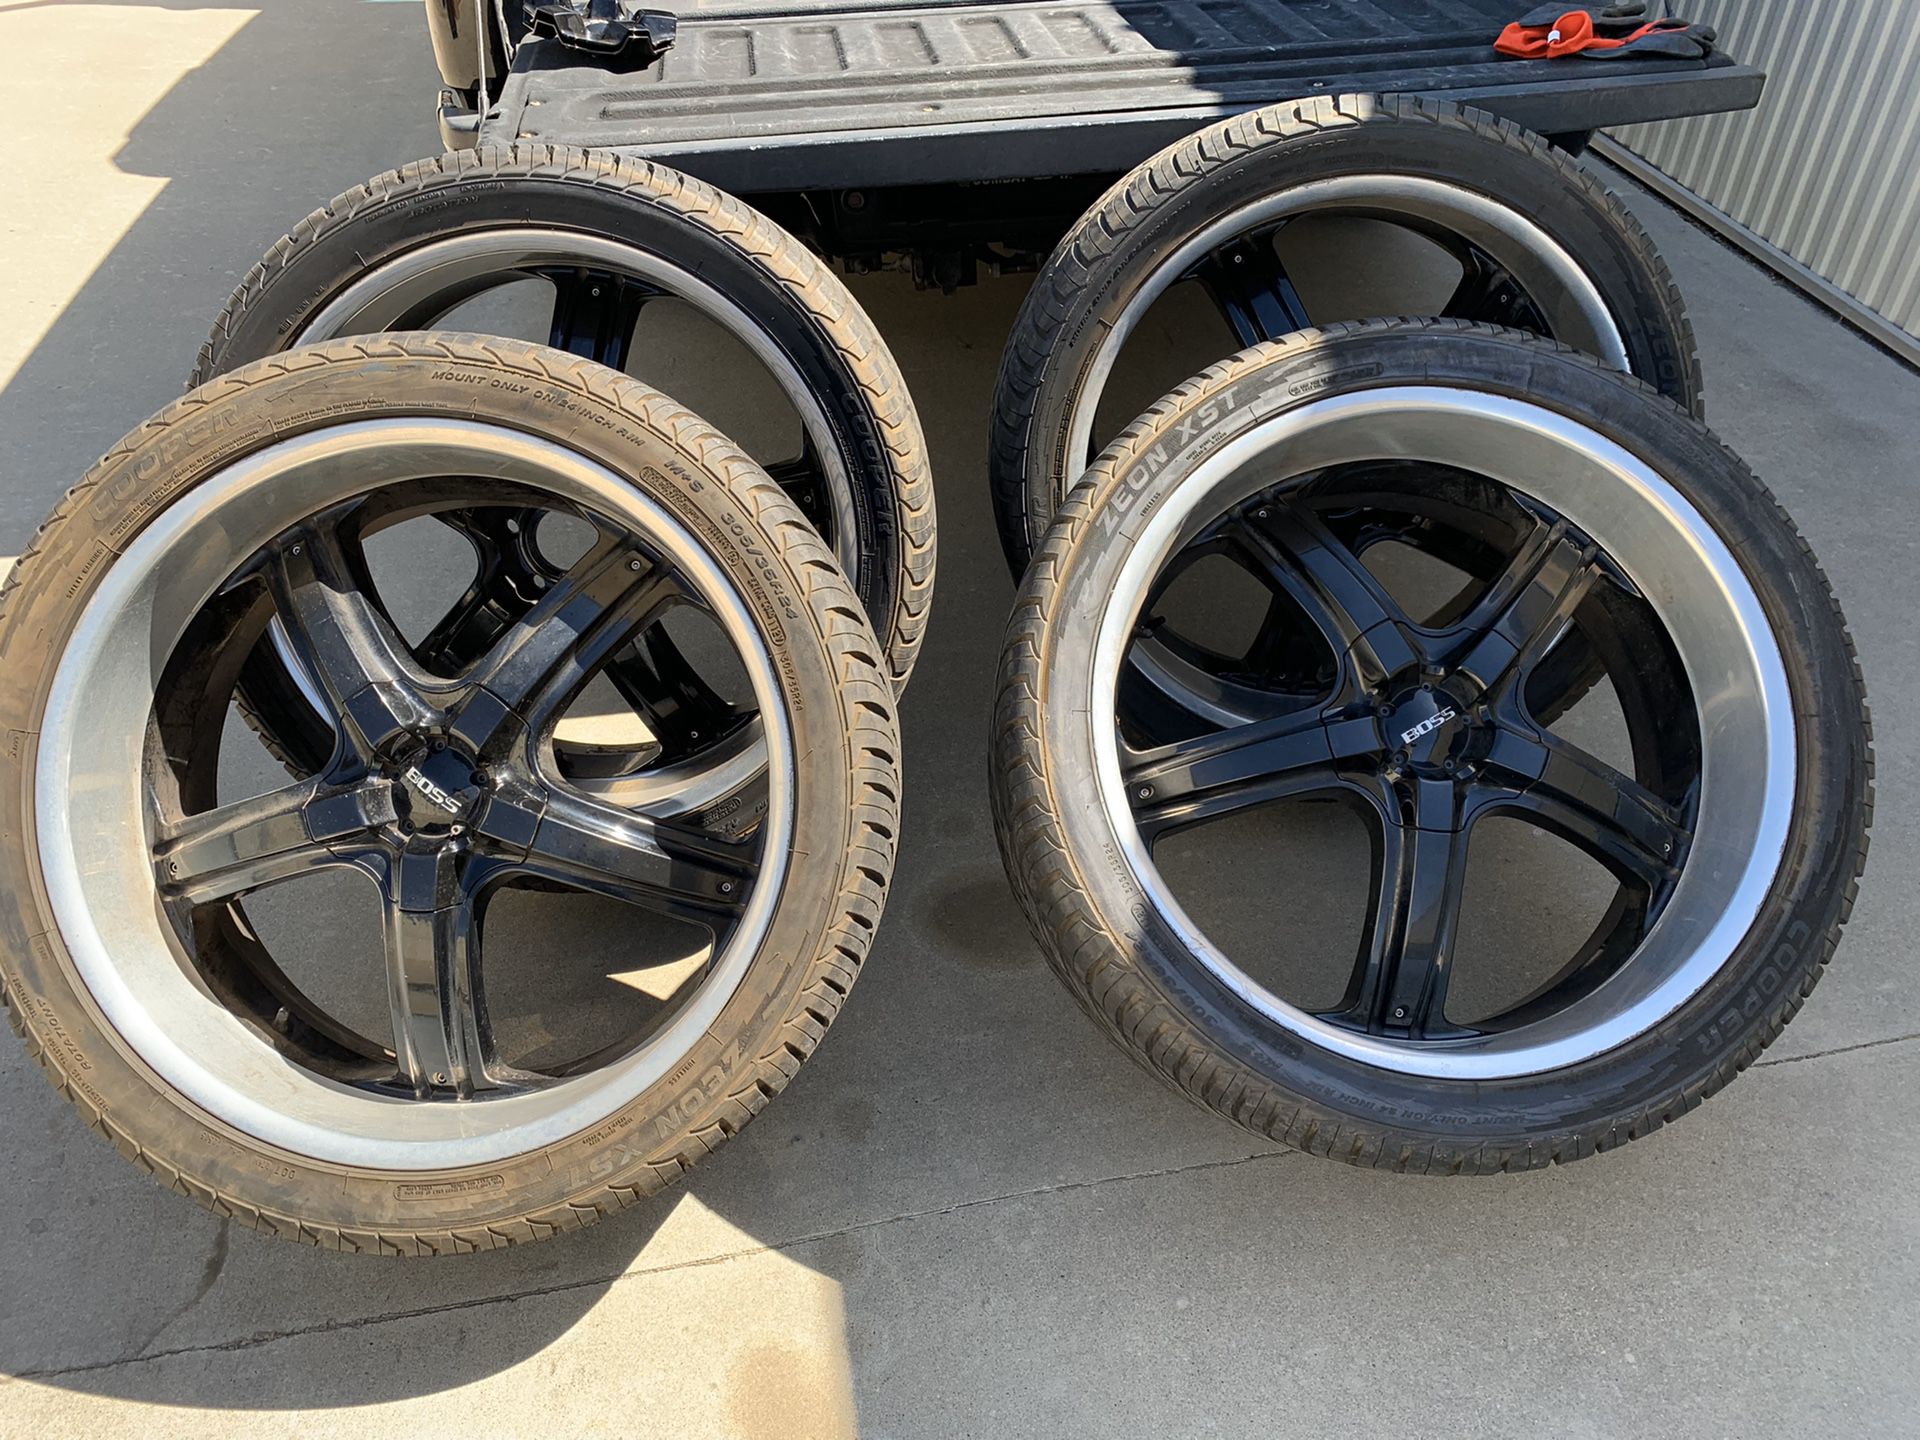 24” Boss wheels with Cooper tires